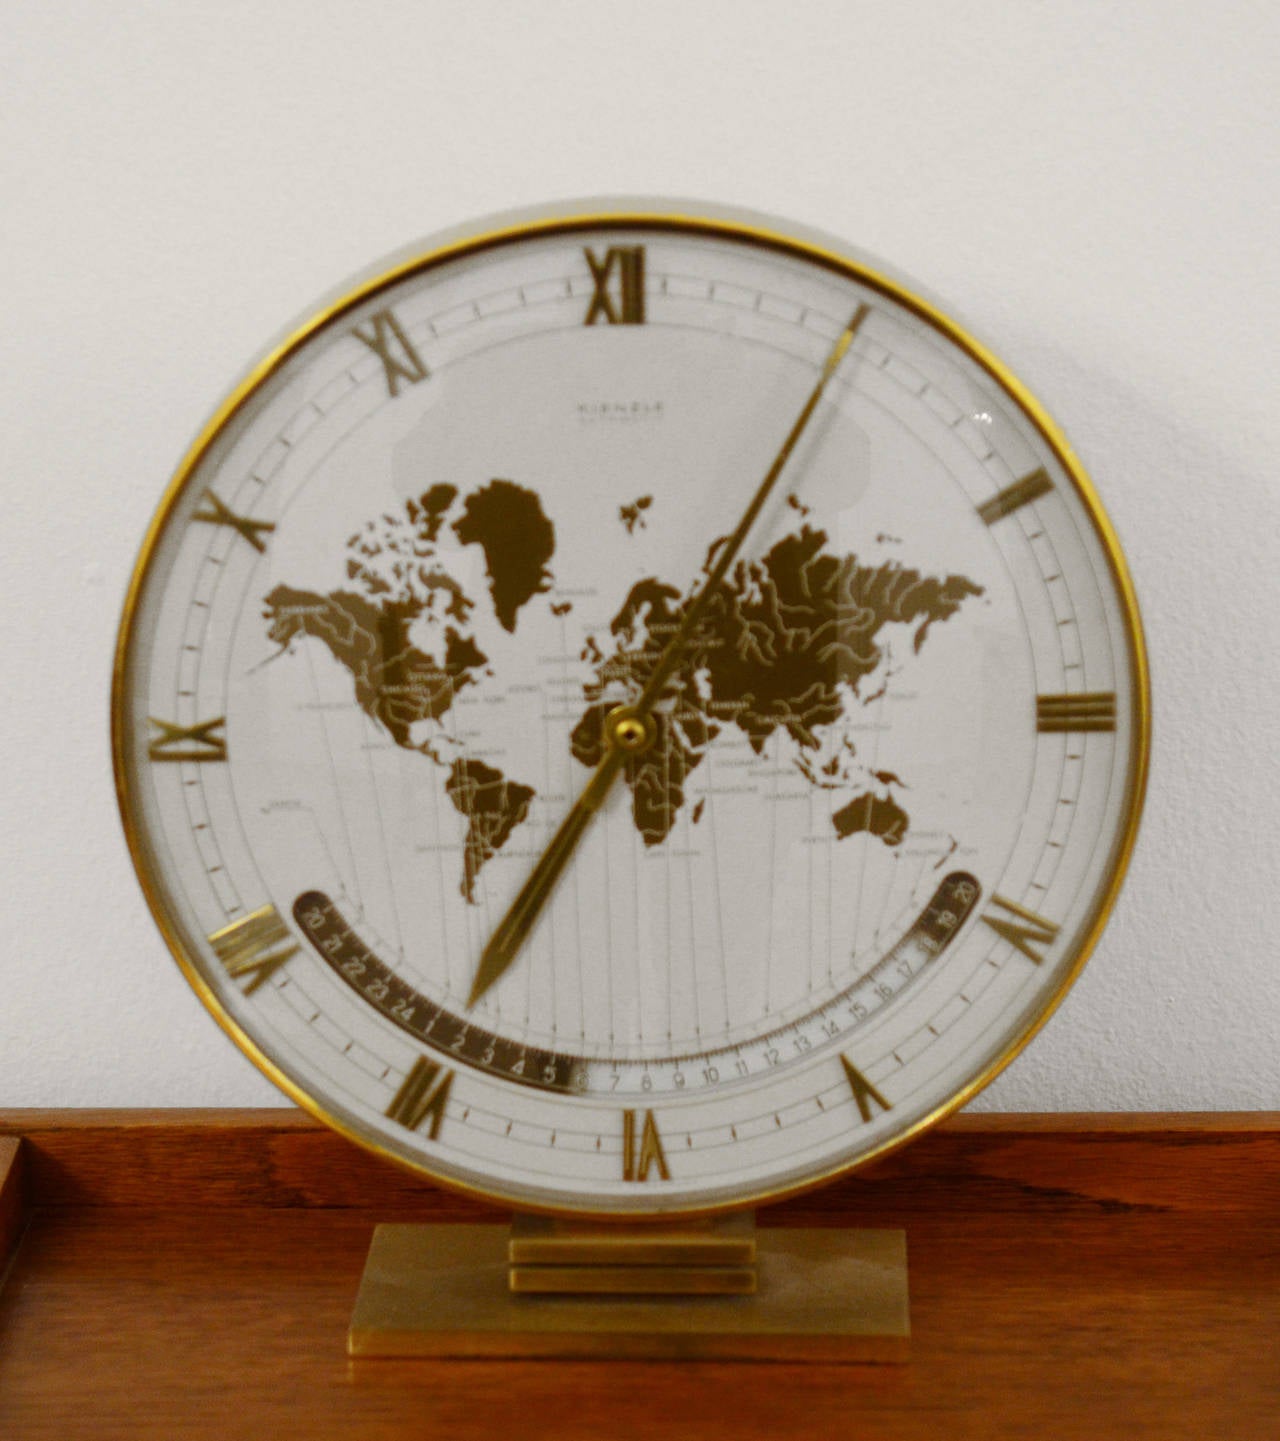 Kienzle Automatic World Timer Zone Clock. 
An exclusive big table clock from Ø 26cm wonderful clocks face with world map and world time zones, crystal glass, the heavy case & base are of solid brass. The most of Kienzle clocks were designed by